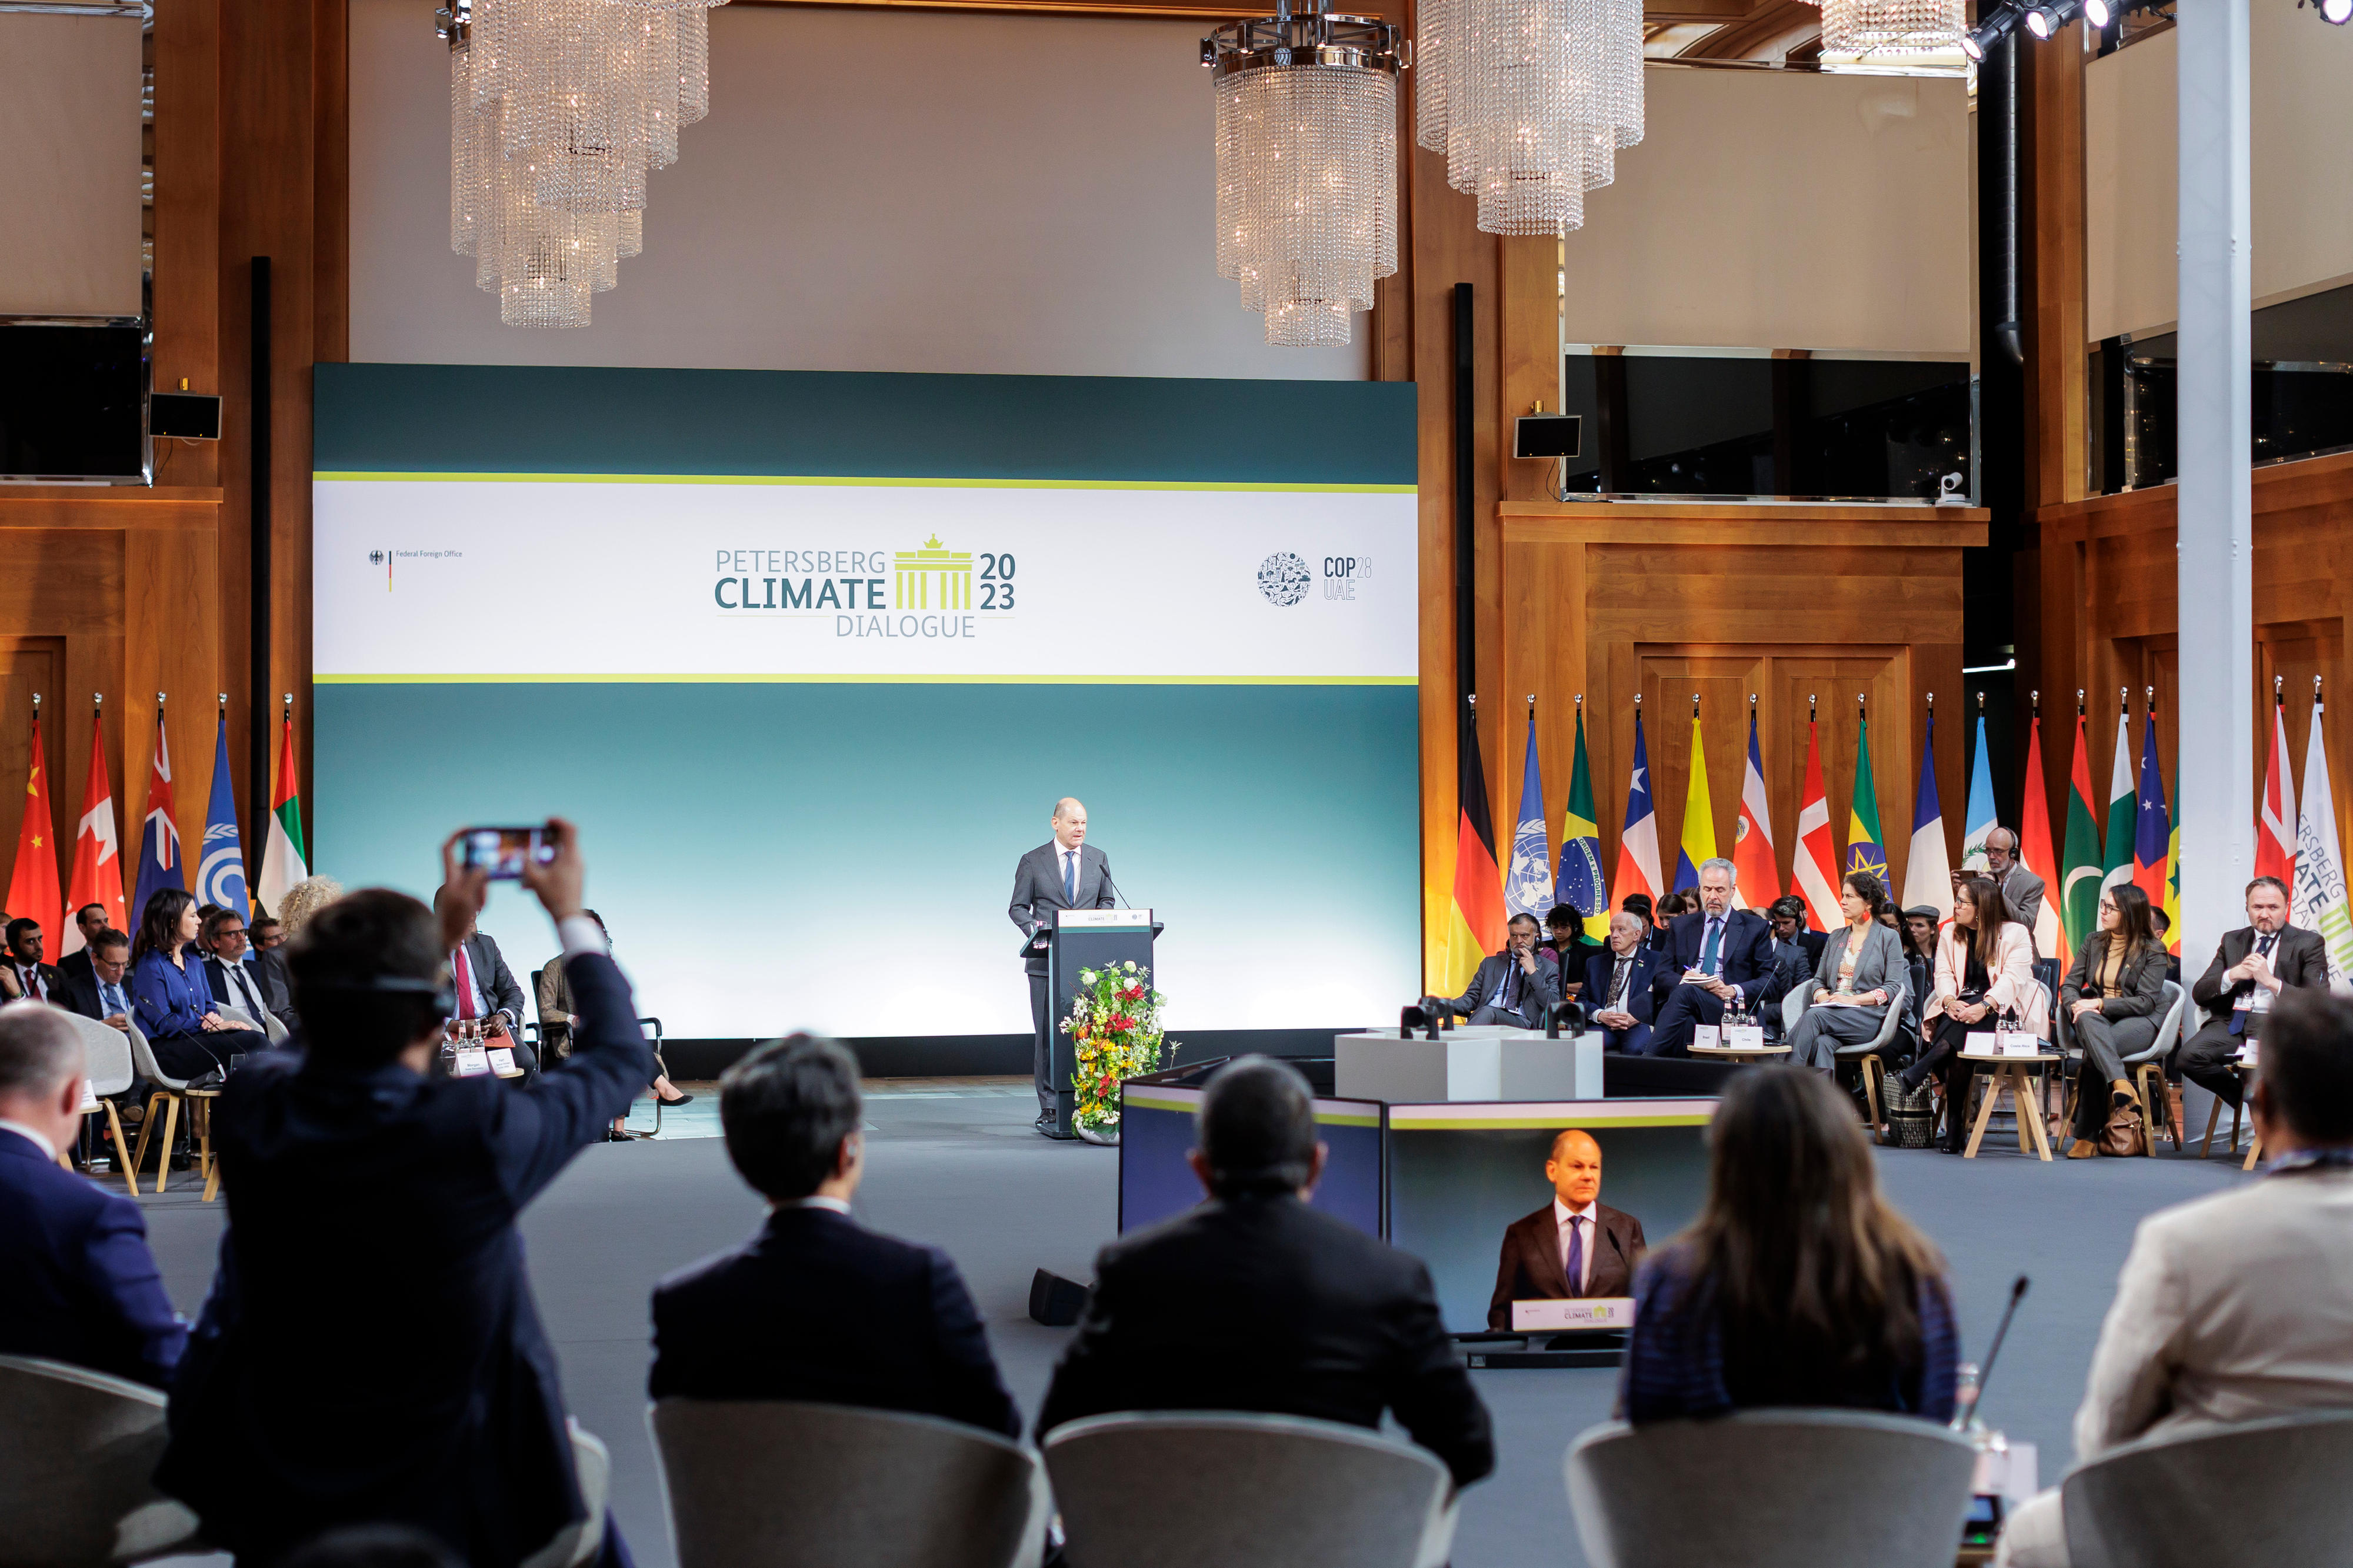 Federal Chancellor Olaf Scholz at the Petersberg Climate Dialogue in Berlin